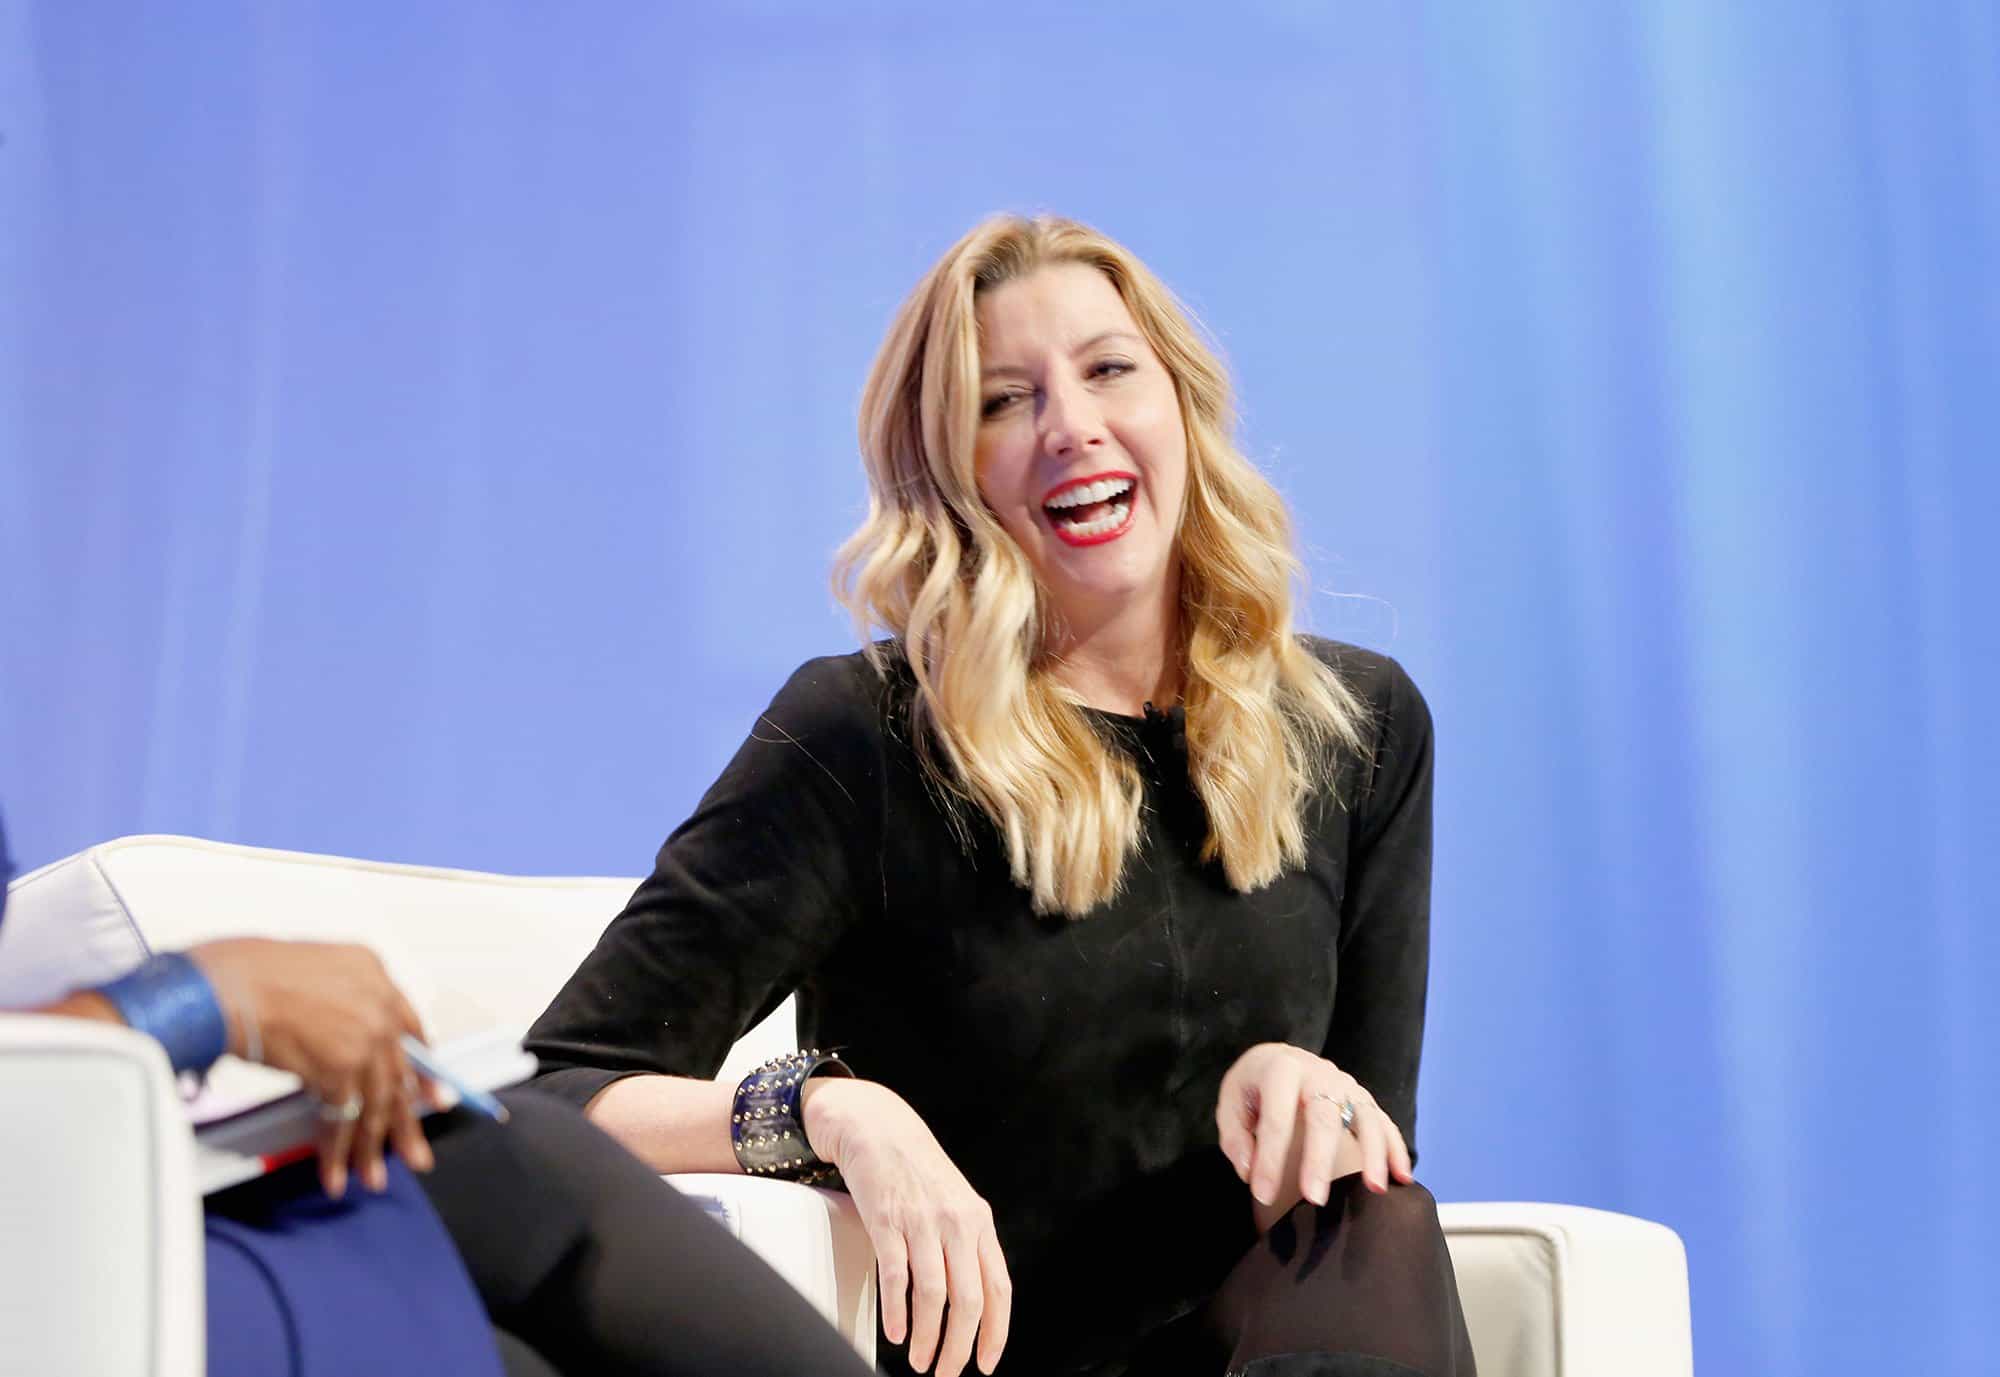 Aiming for Failure Helped Sarah Blakely Build Her Spanx Empire – Selfmade  Eyewear